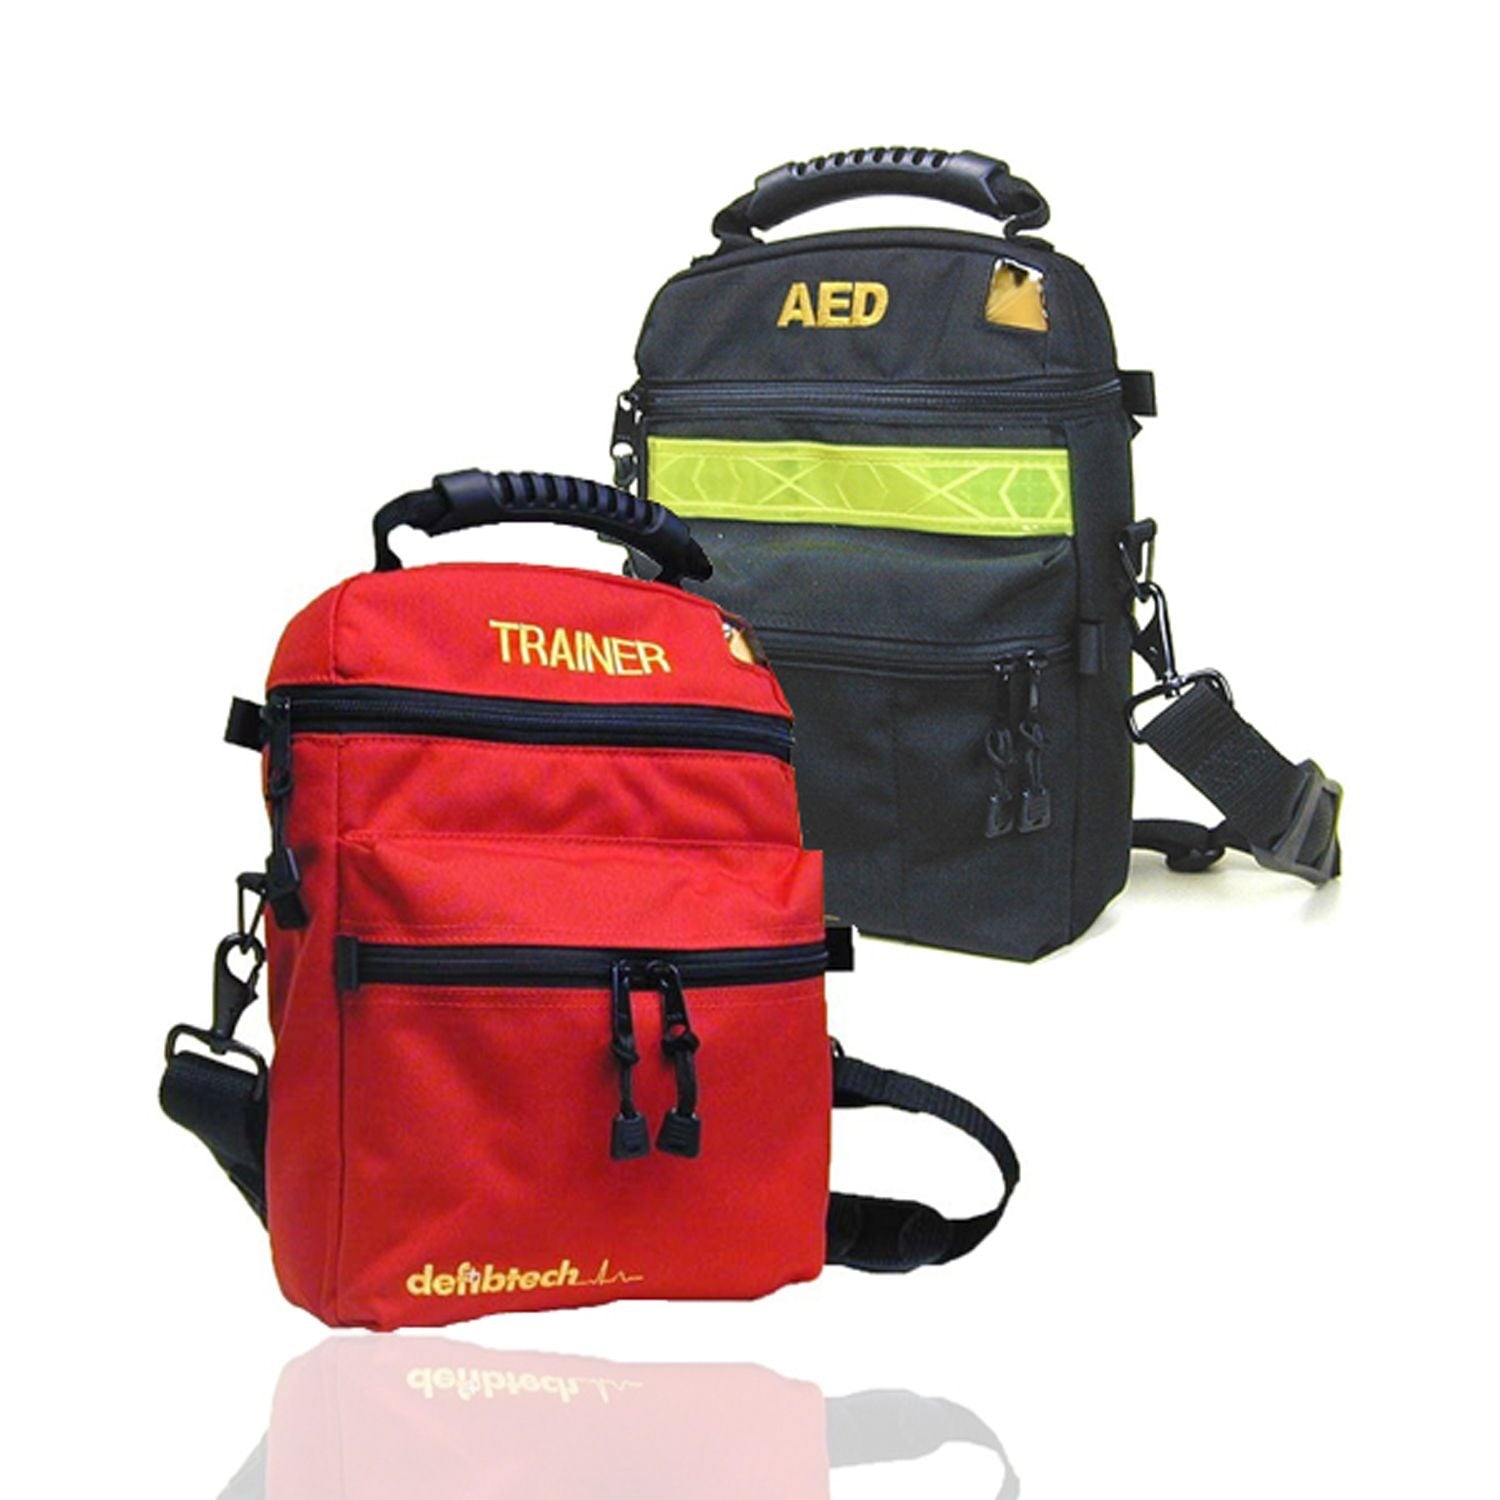 Lifeline AED Soft Carrying Case | Red